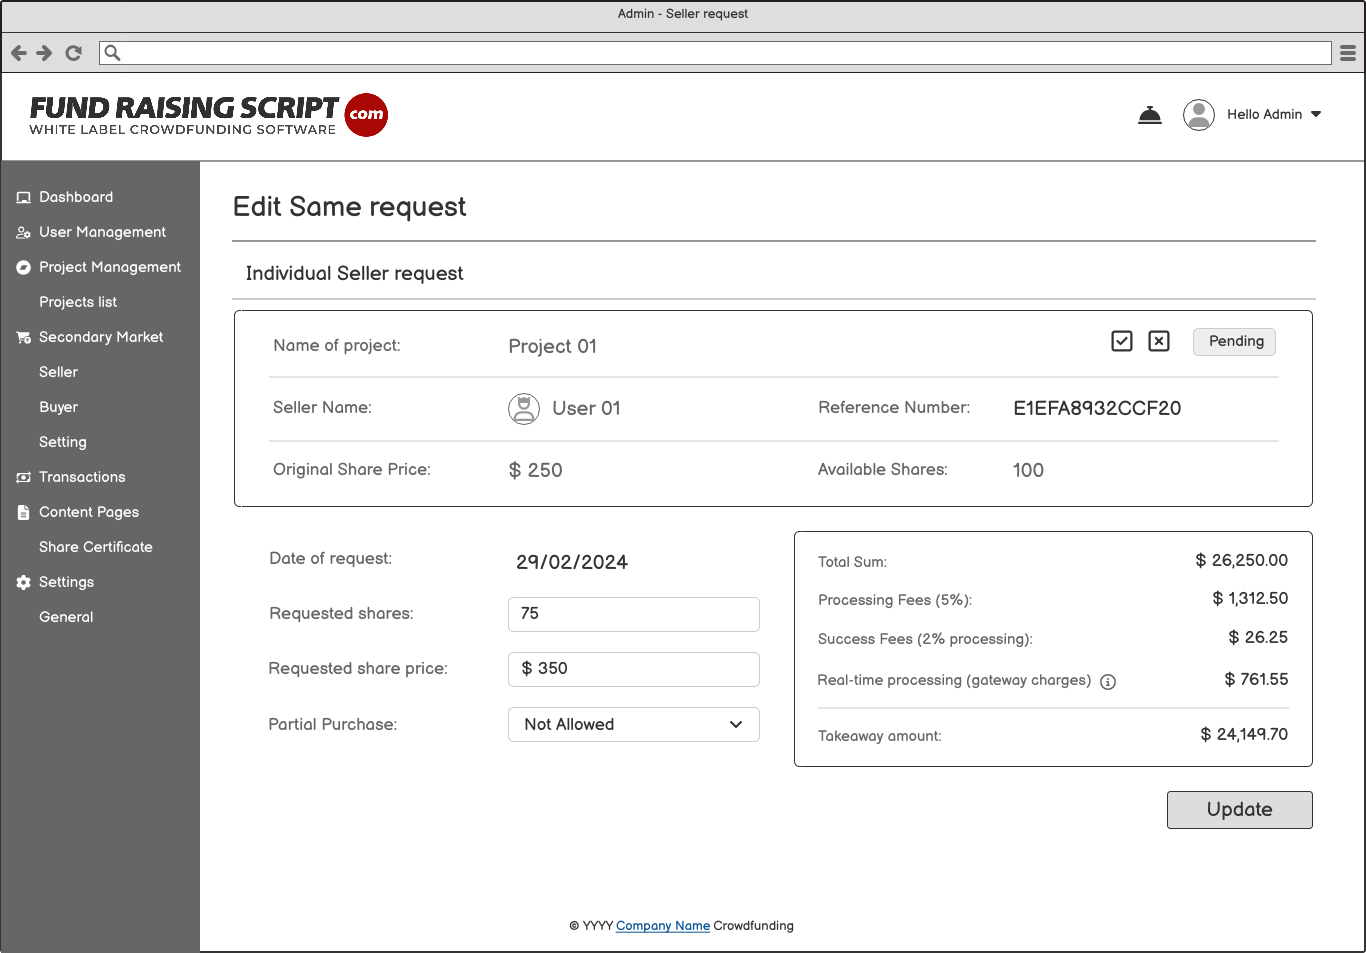 4.1 Admin first Seller request - Edit view